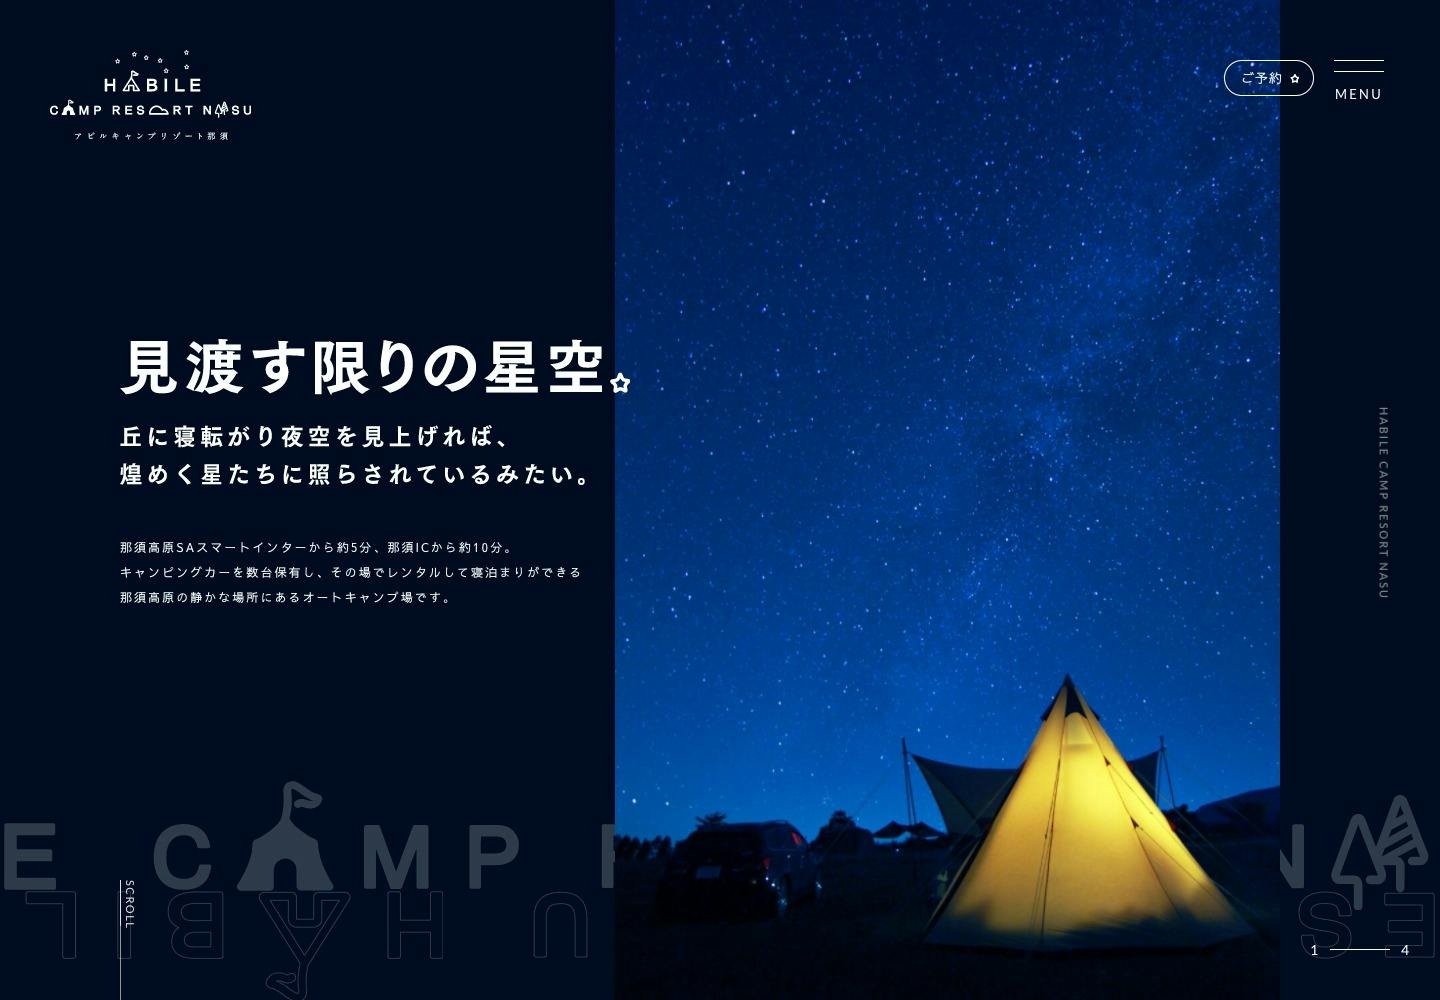 Cover Image for 見渡す限りの星空をあなたに | アビルキャンプリゾート那須